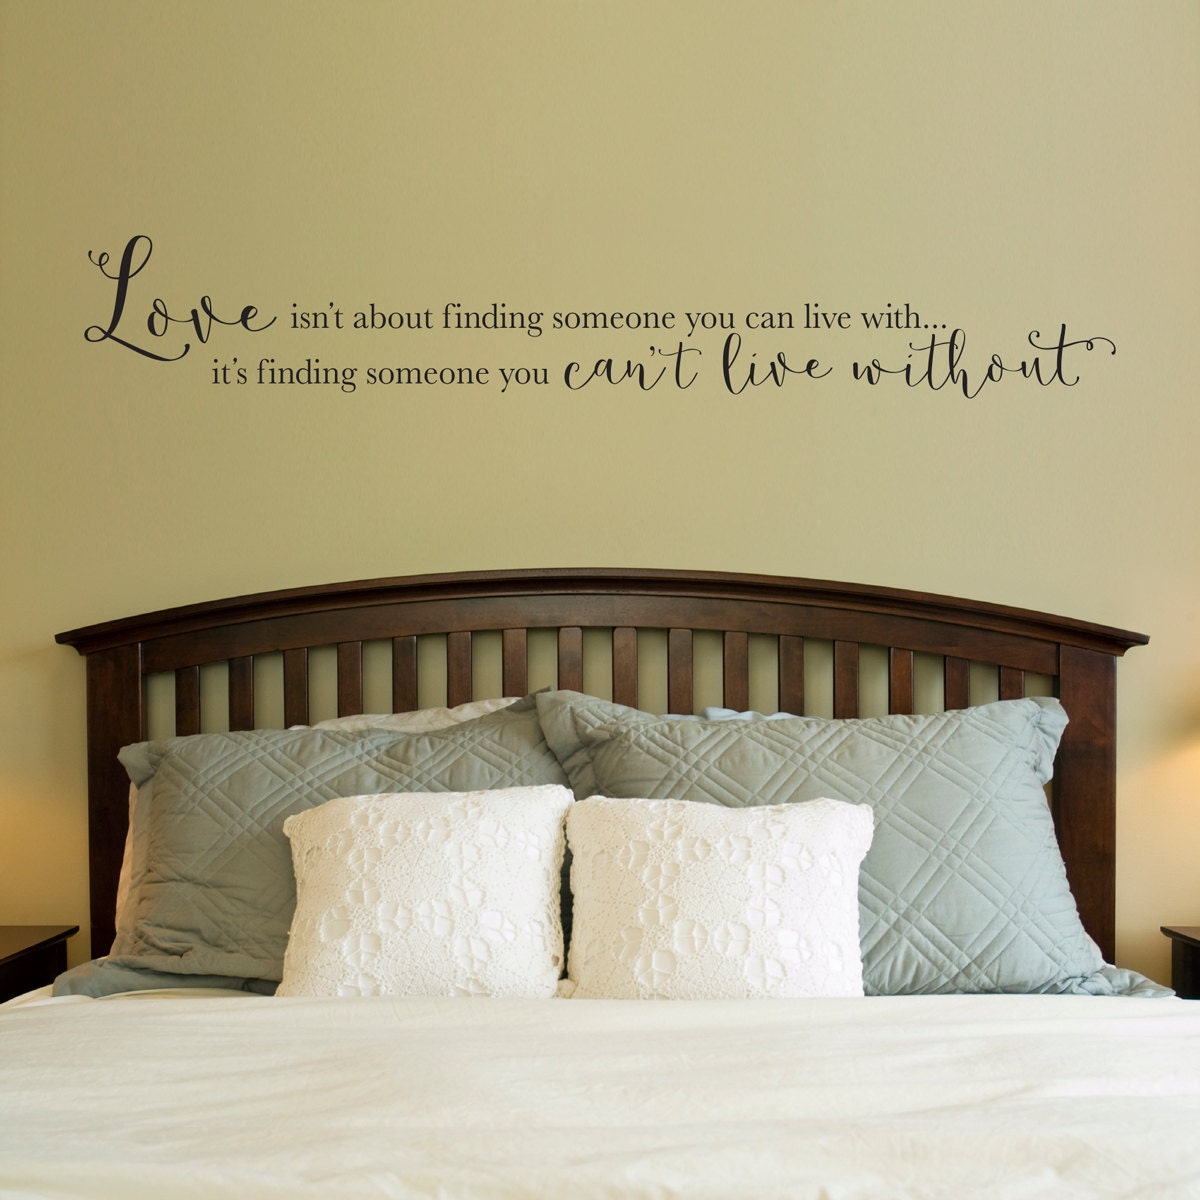 Love Decal | Can't live without Quote | Couple Bedroom Decal | Love Wall Vinyl